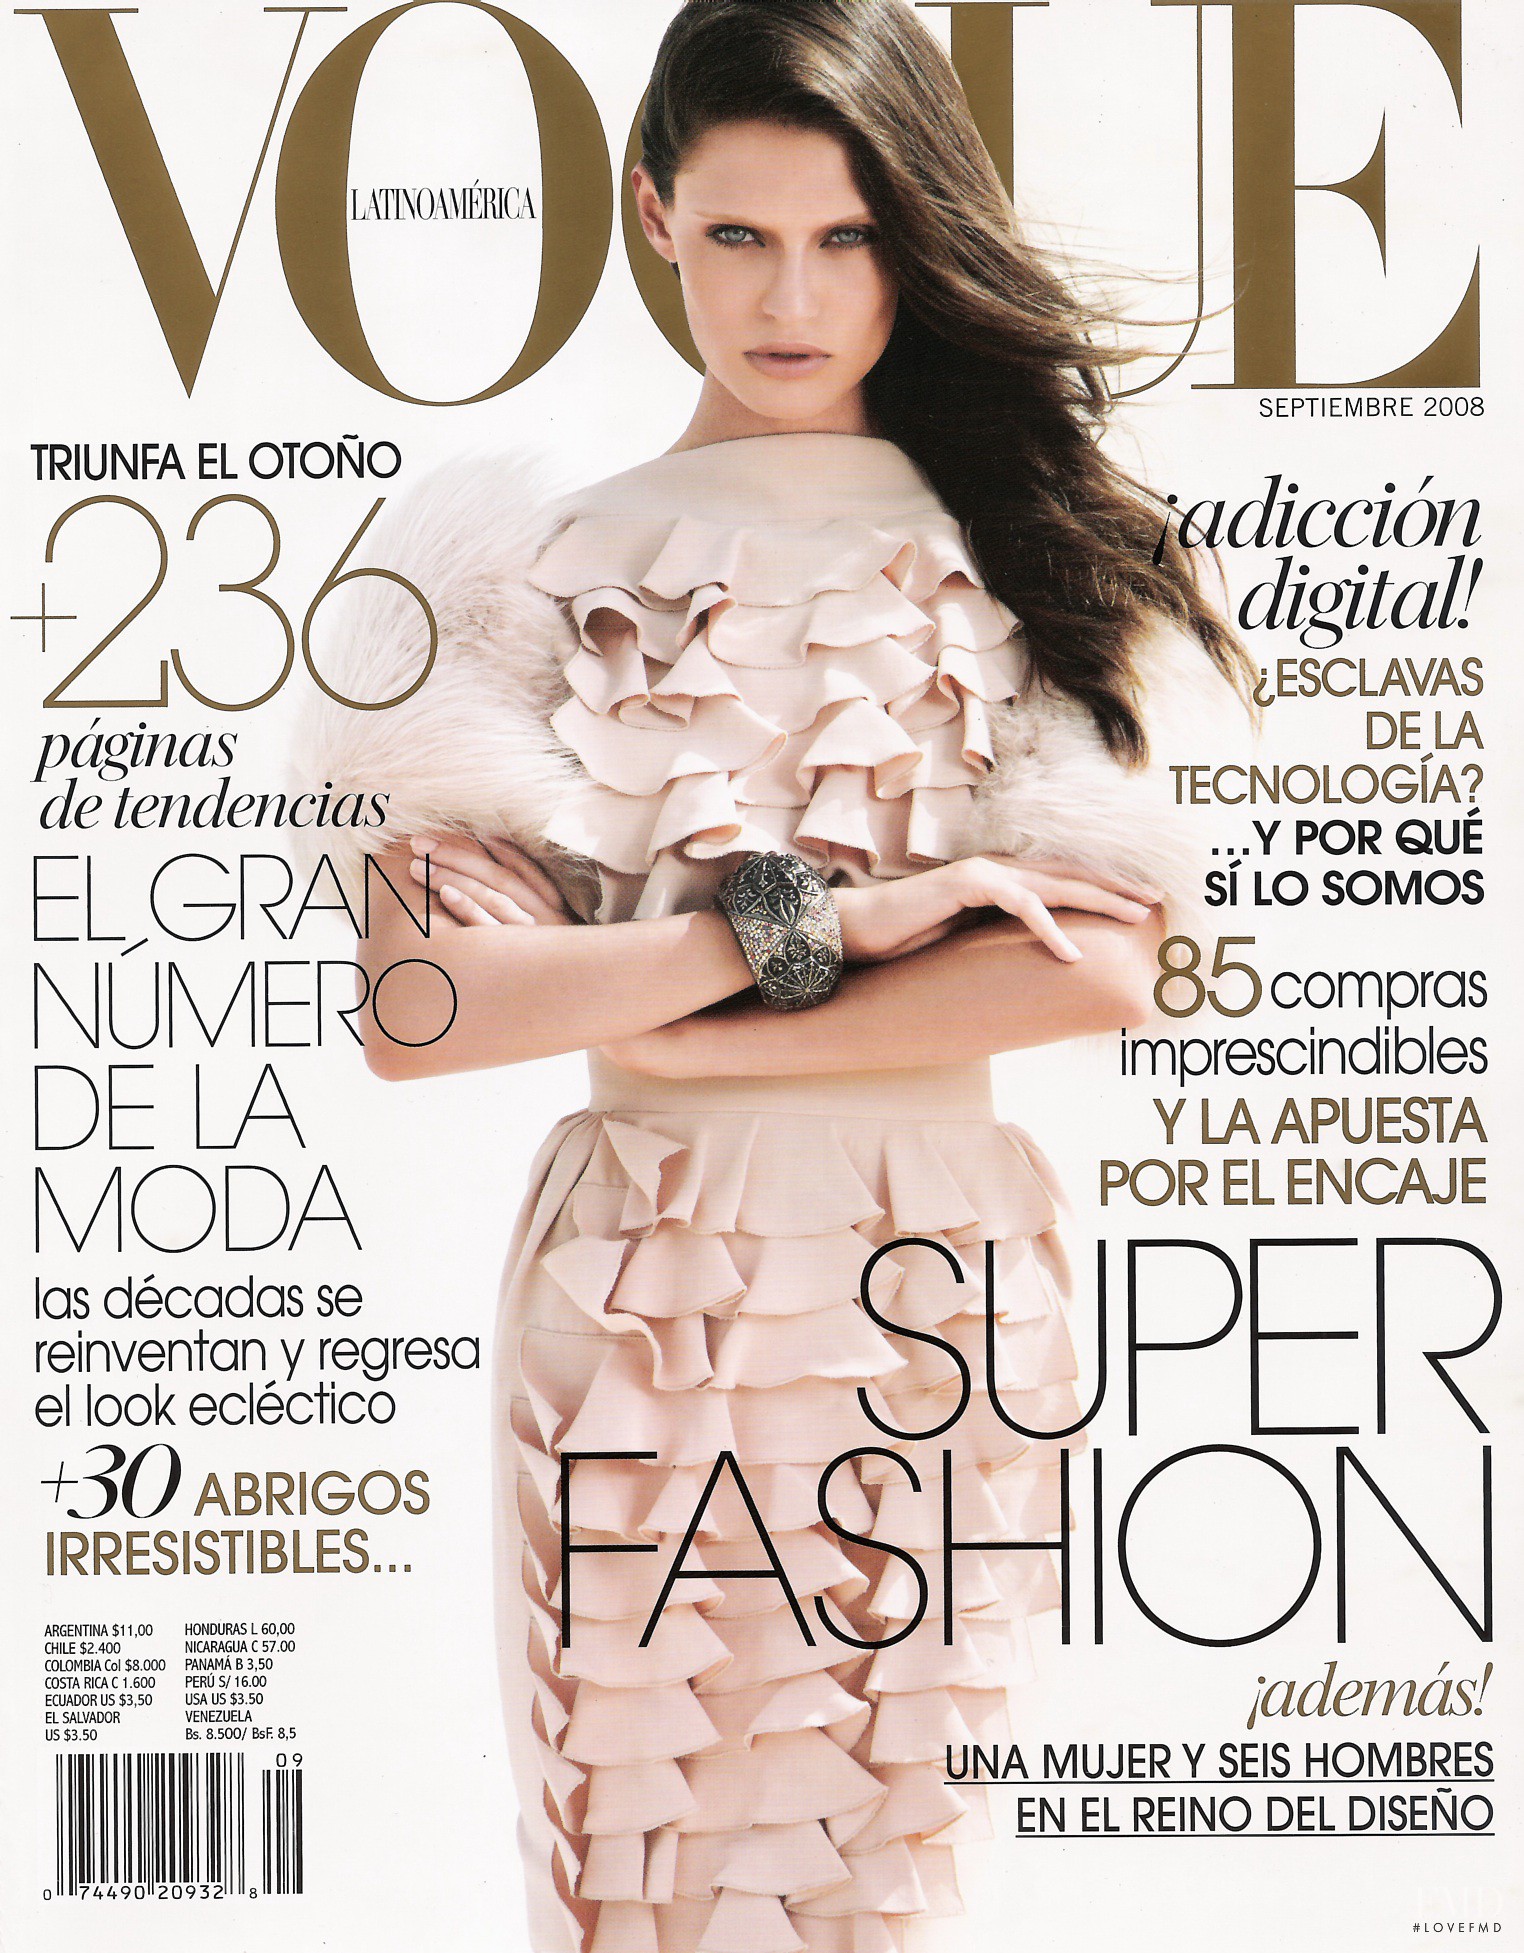 Cover of Vogue Latin America with Bianca Balti, September 2008 (ID:9987 ...